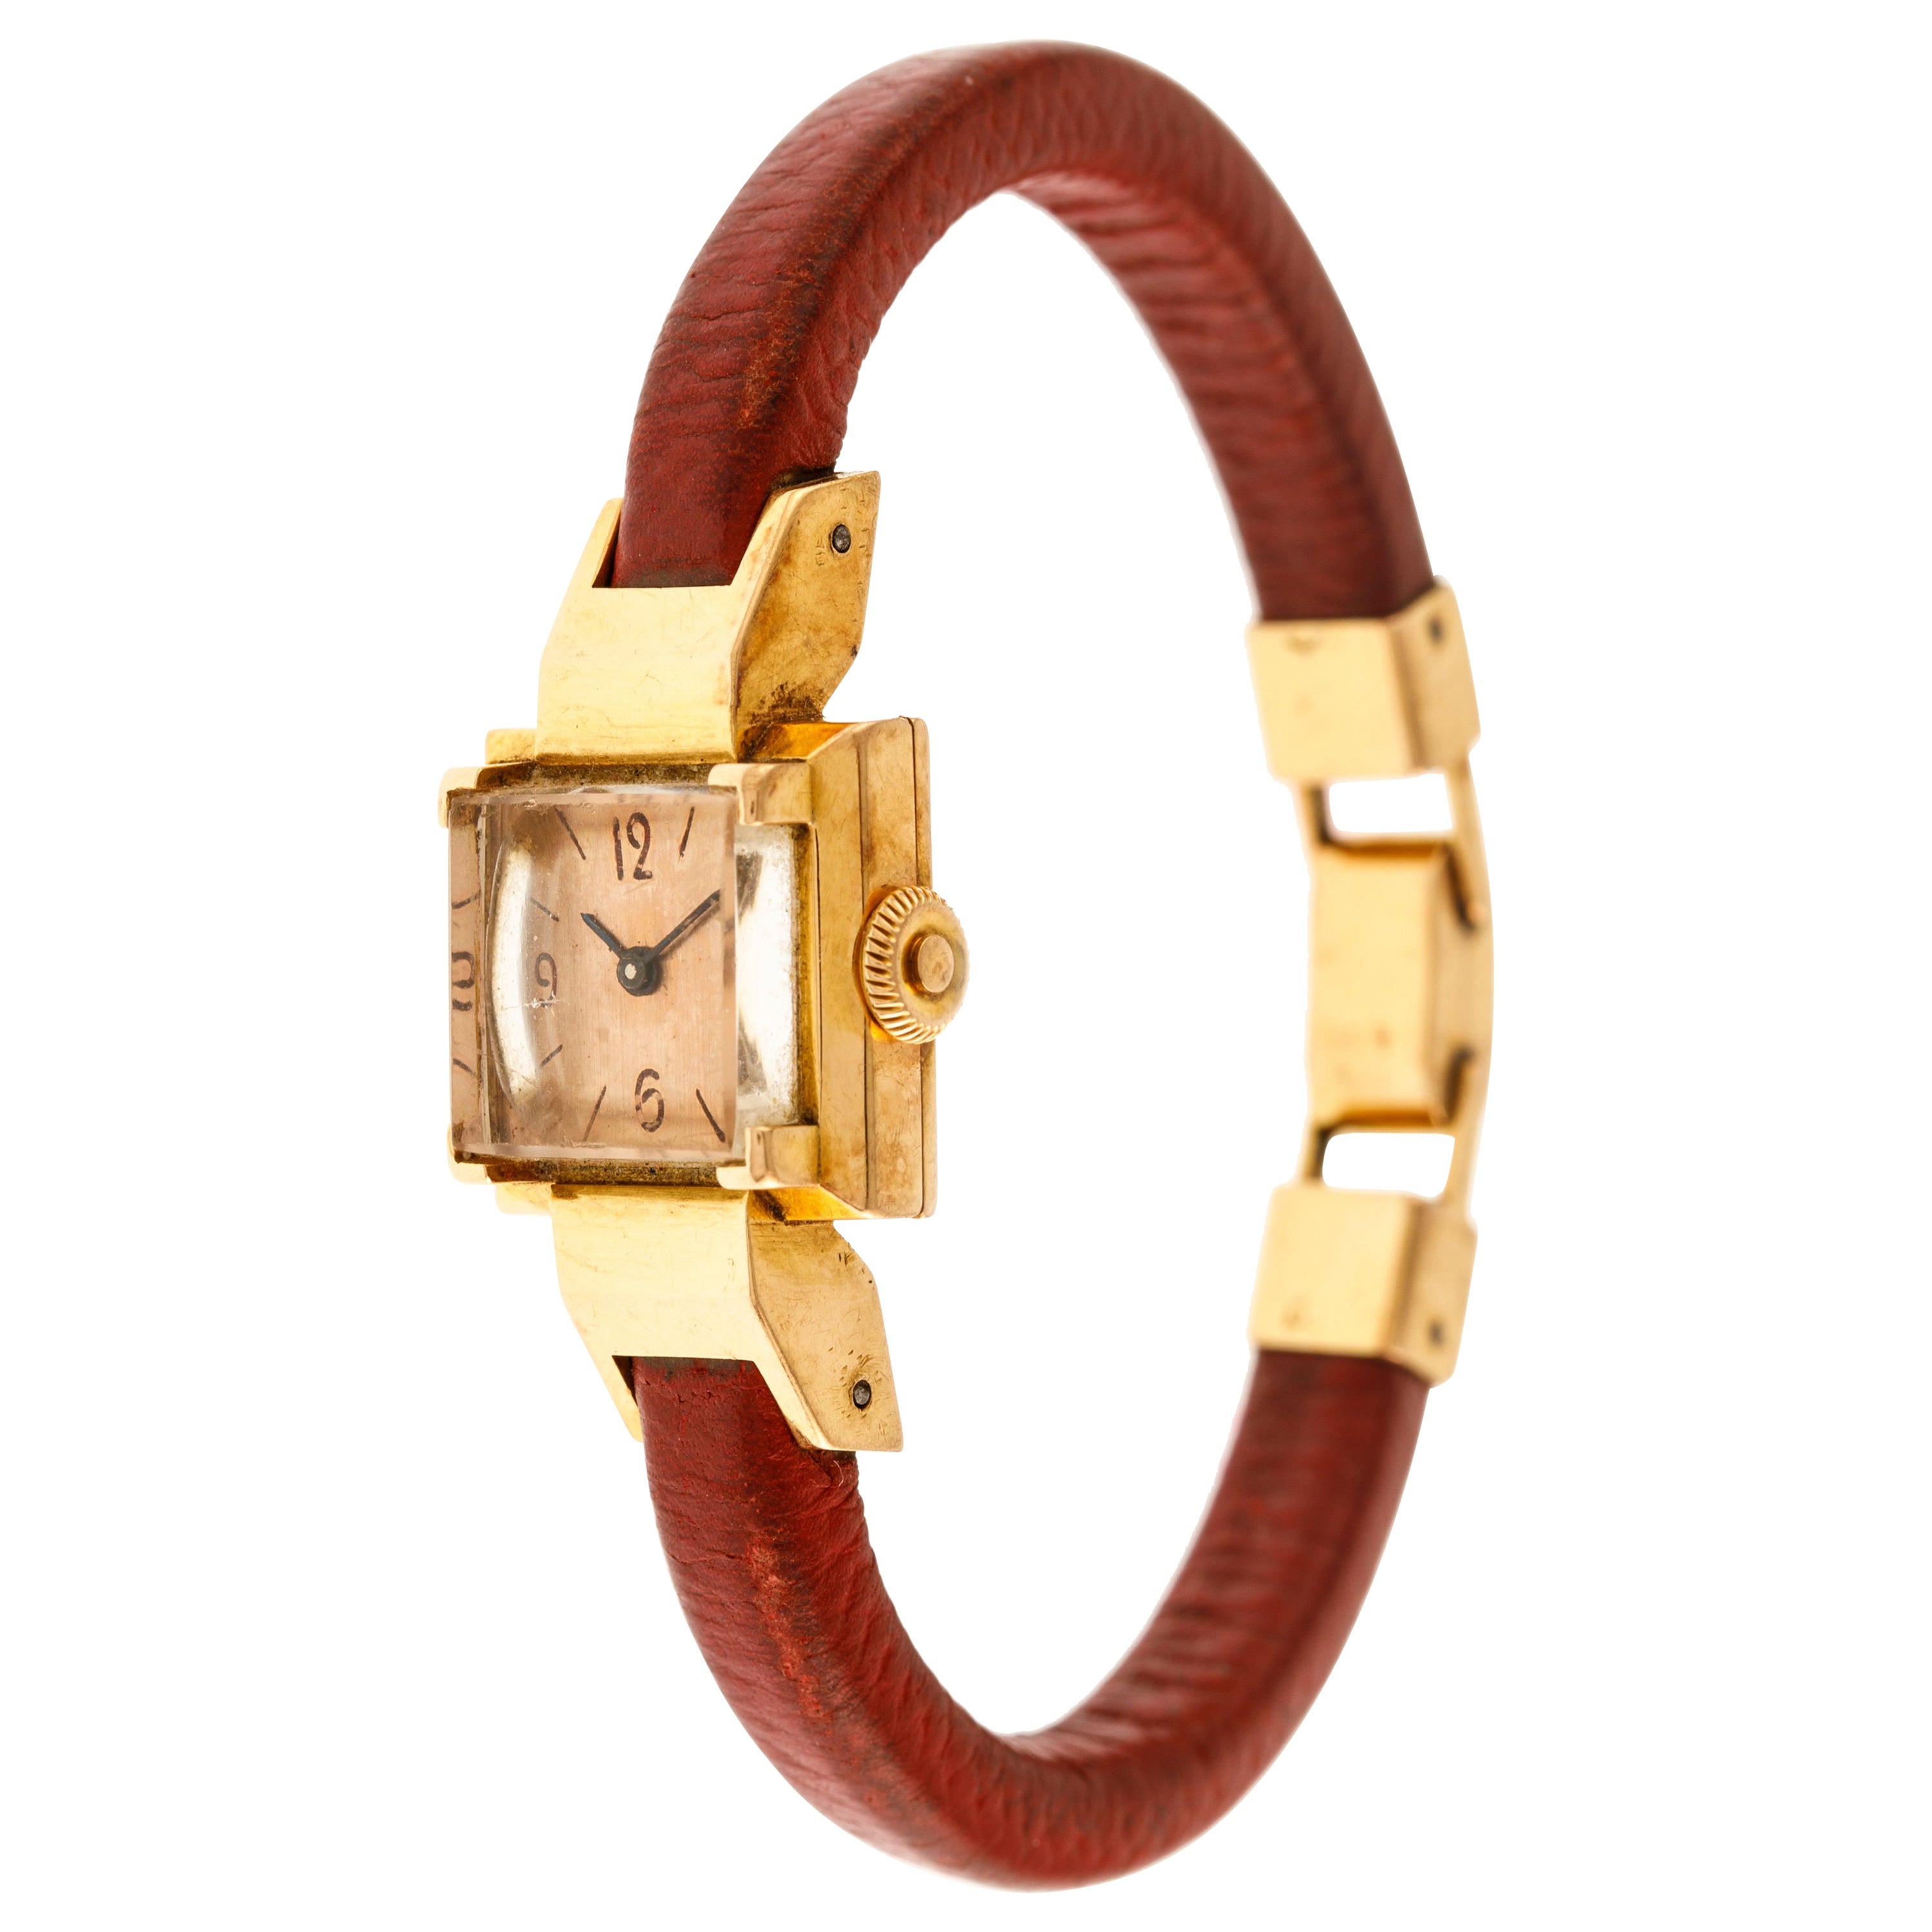 Universal Genève Retailed by Hermès Wrist Watch 18 Carat Yellow Gold For Sale